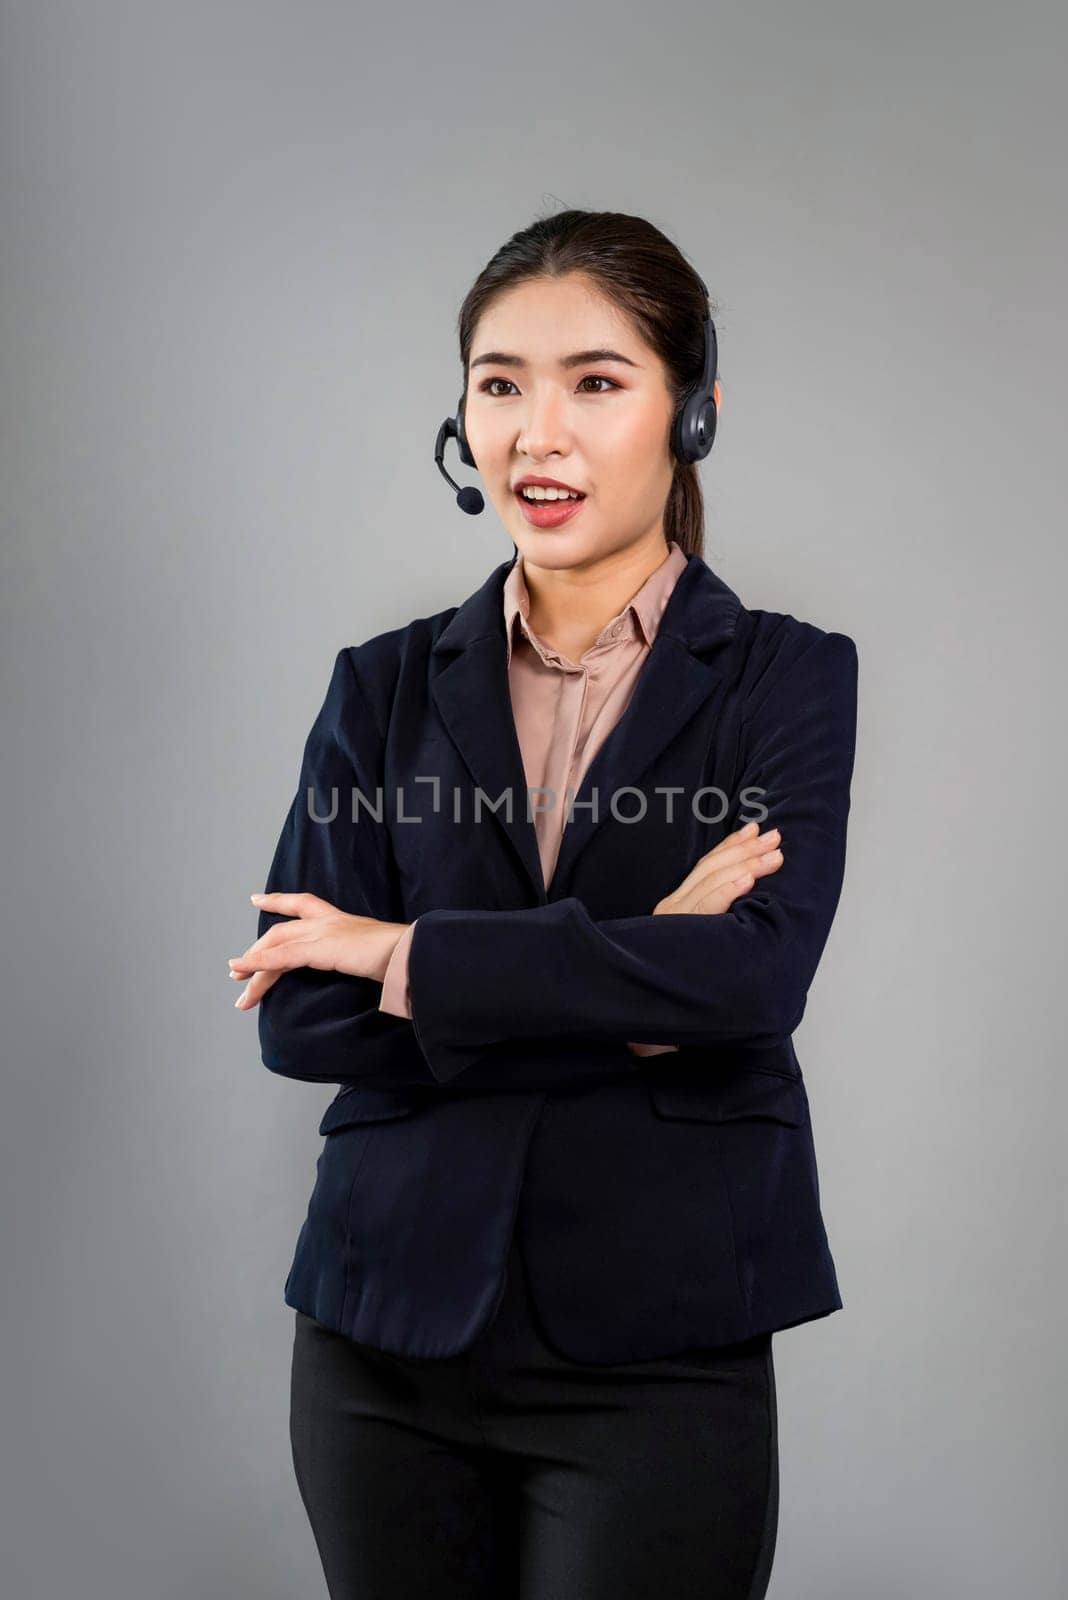 Attractive asian female call center operator with happy smile face advertises job opportunity on empty space, wearing a formal suit and headset on customizable isolated background. Enthusiastic